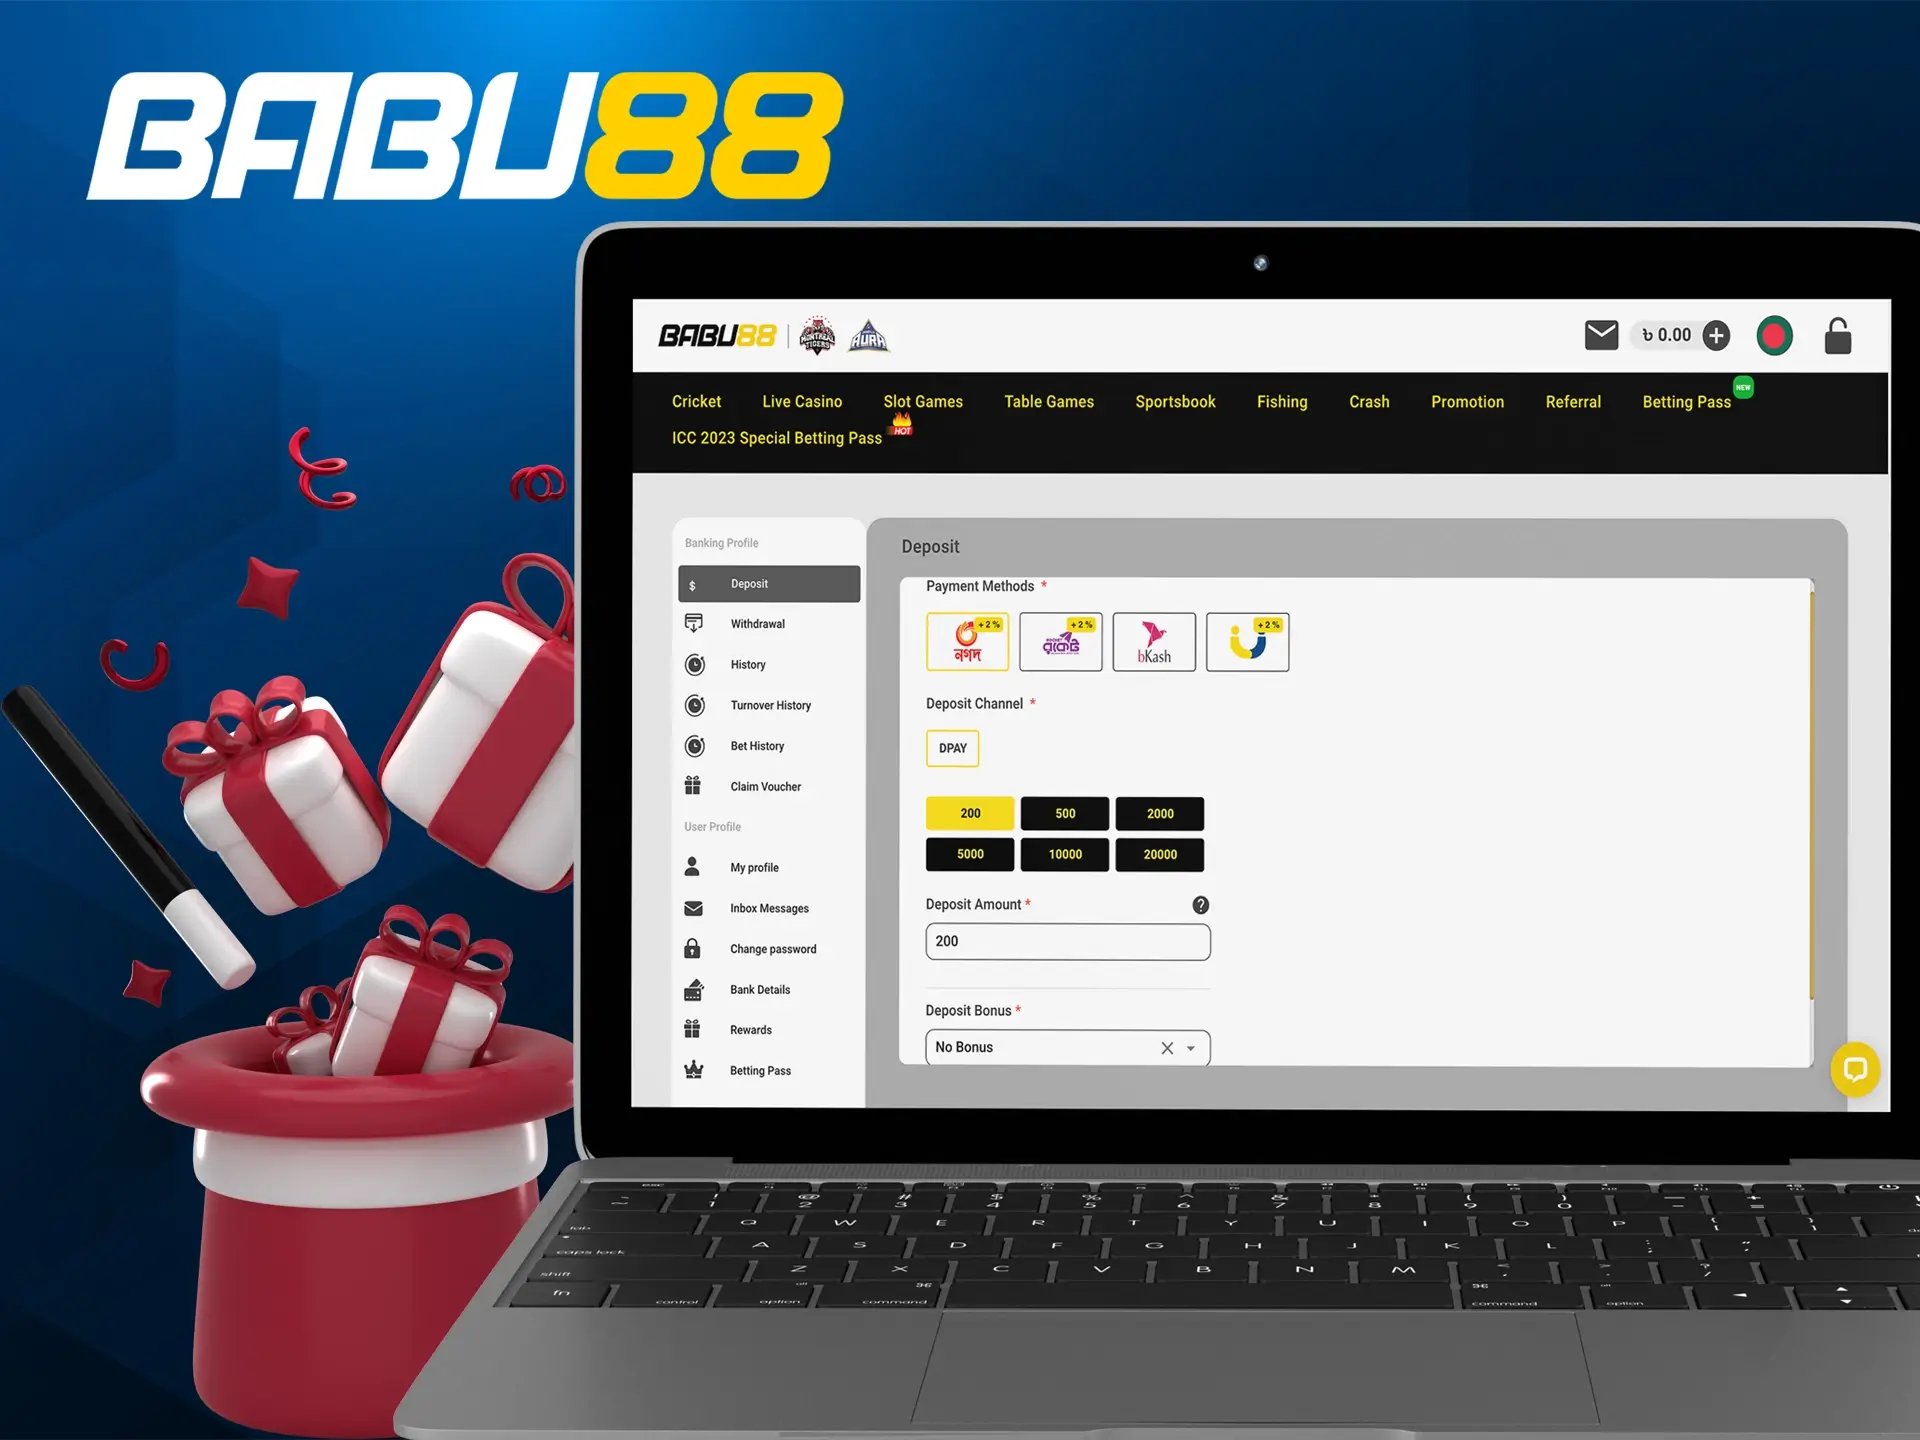 Deposit and withdraw at your convenience, as Babu88 is one of the best casinos in Bangladesh.